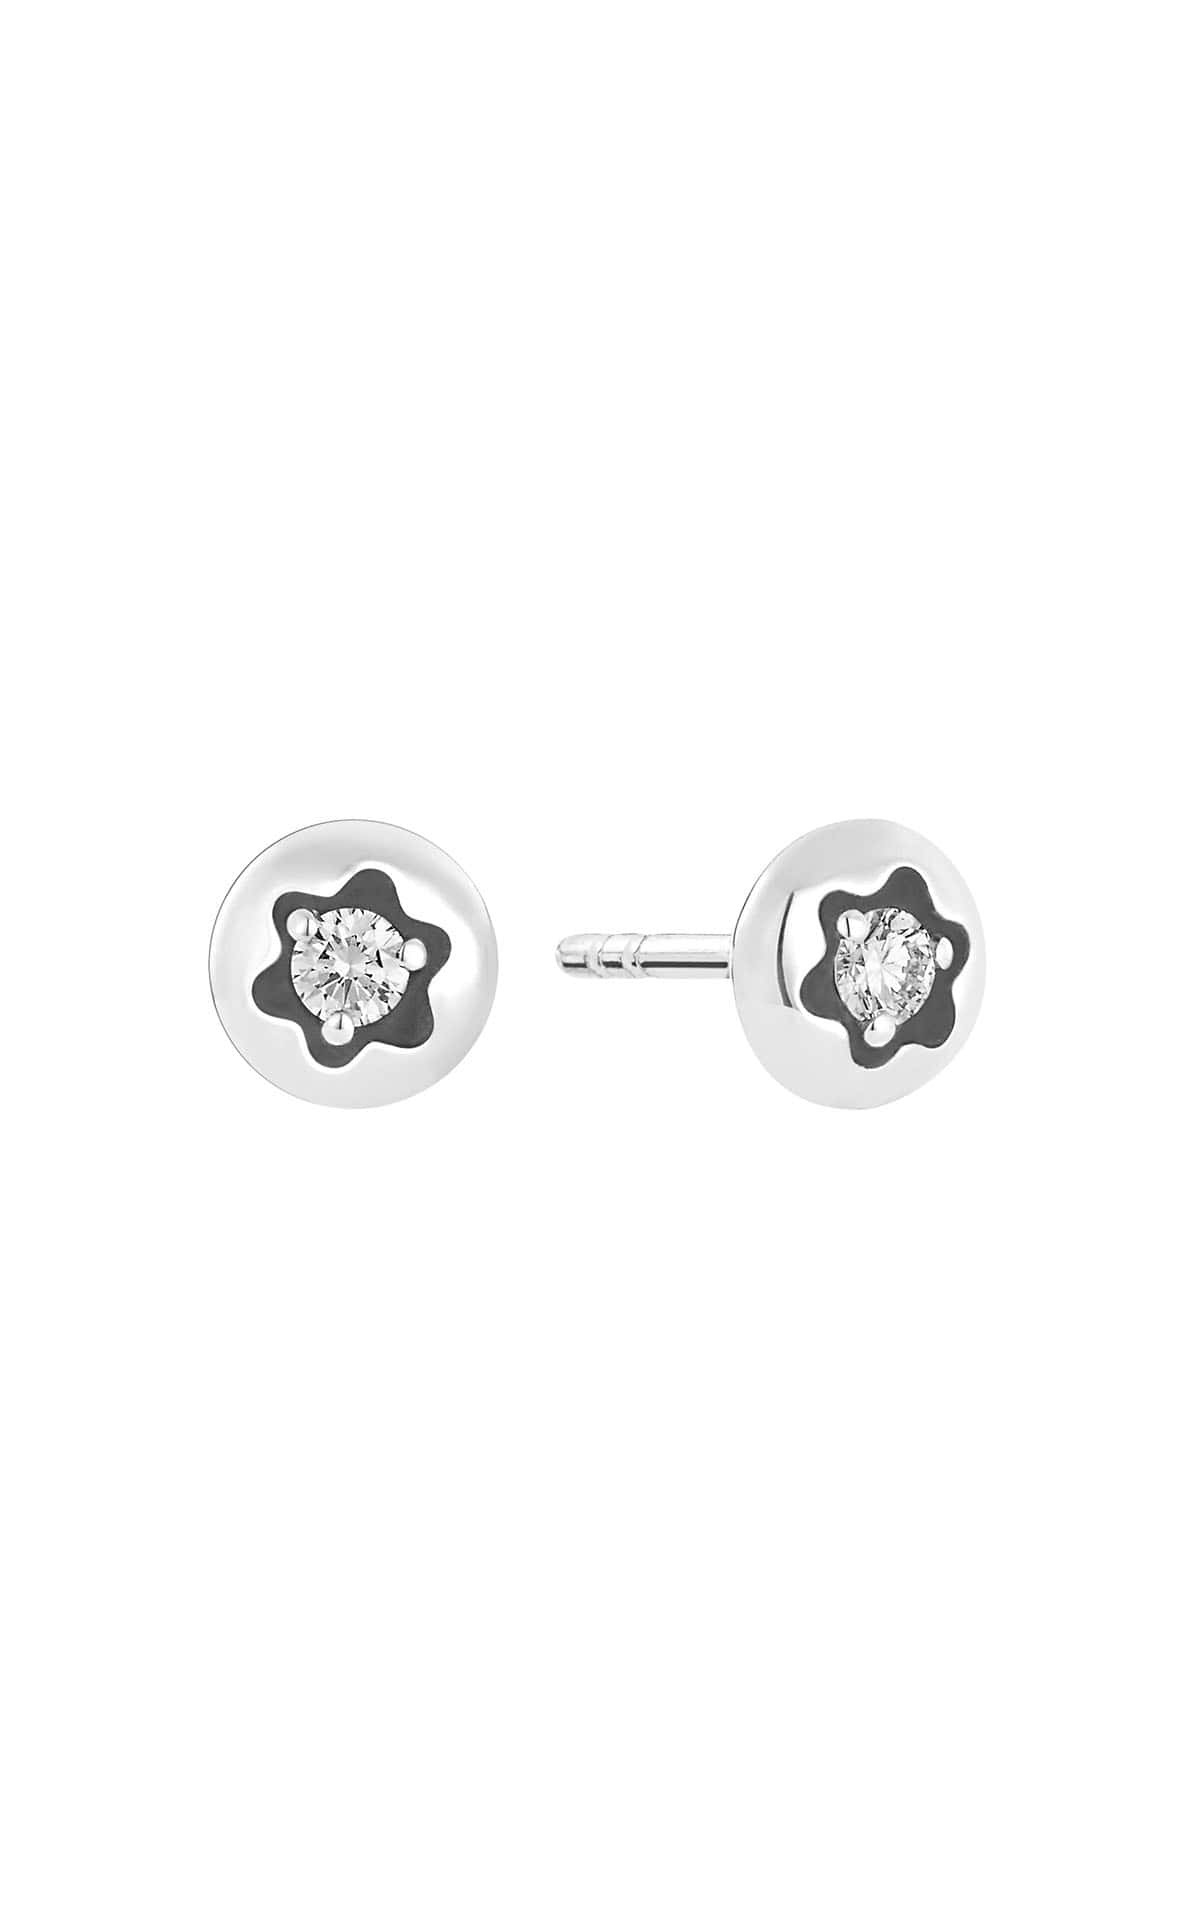 Earstuds in white gold and diamond Montblanc